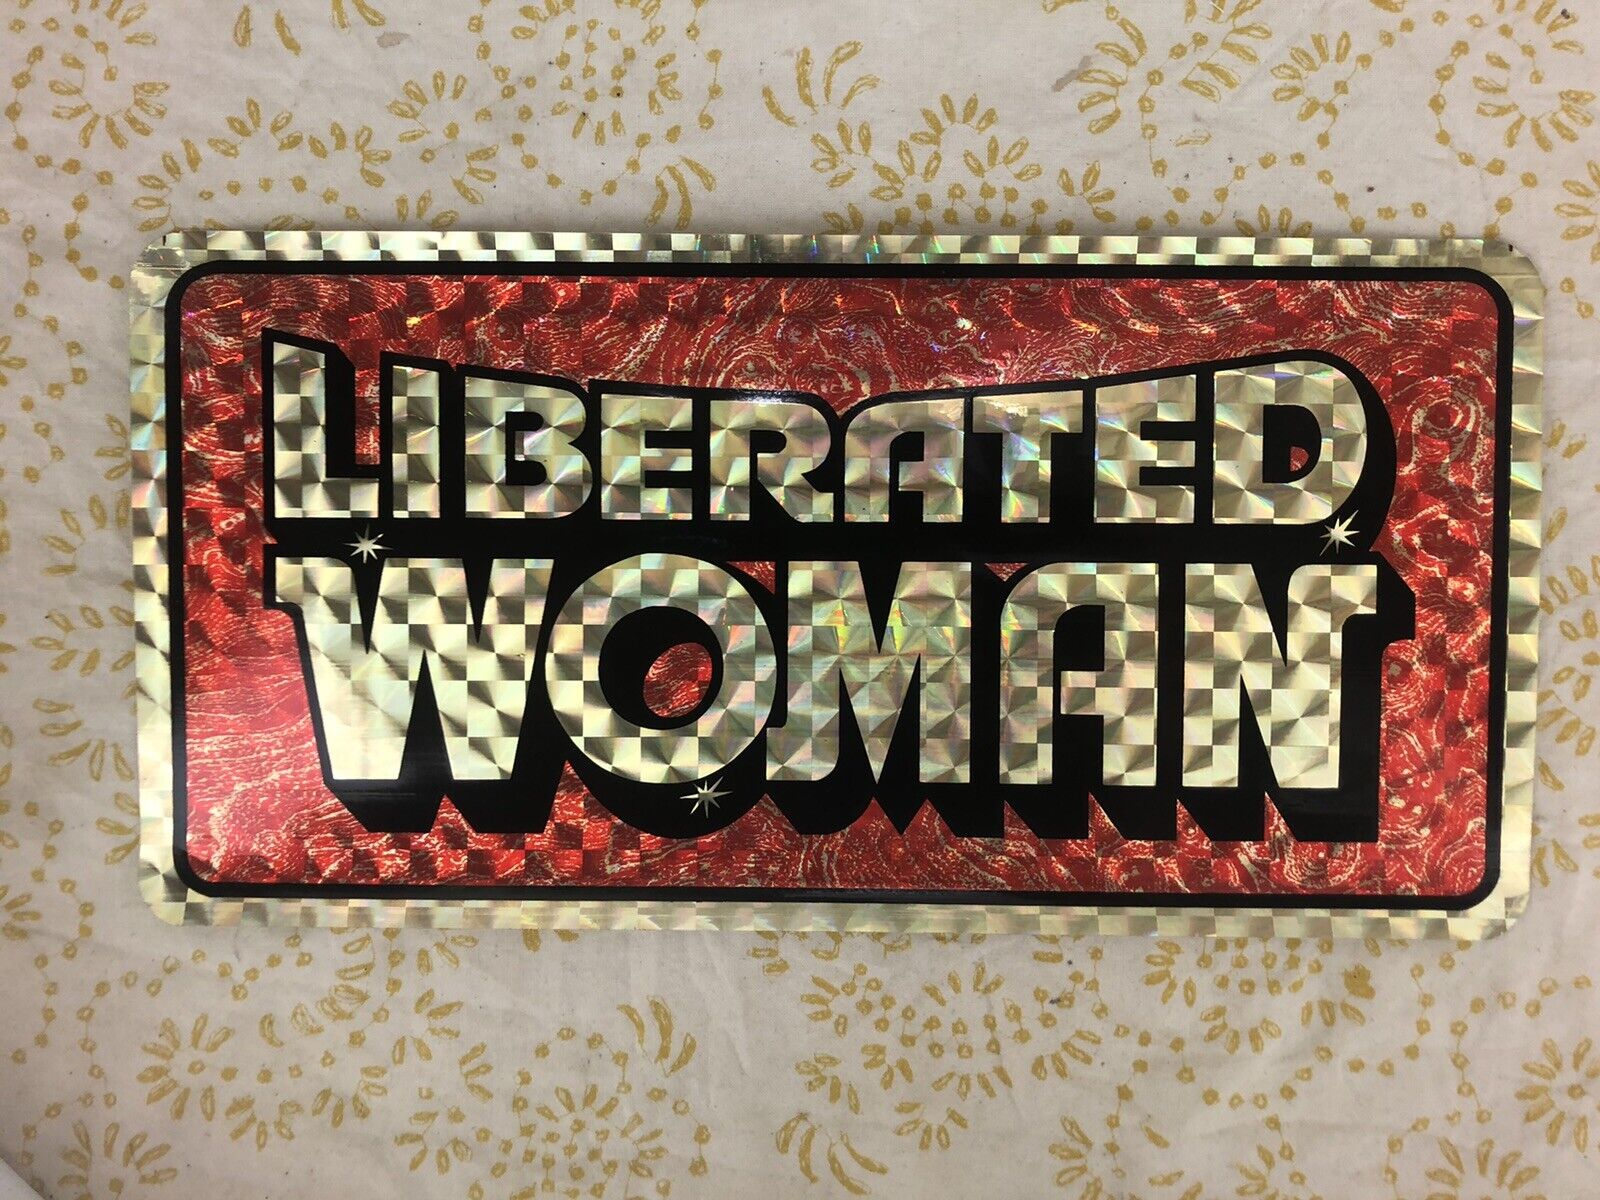 Vintage Prismatic Decal LIBERATED WOMAN 70s License Plate Prism Sticker NOS